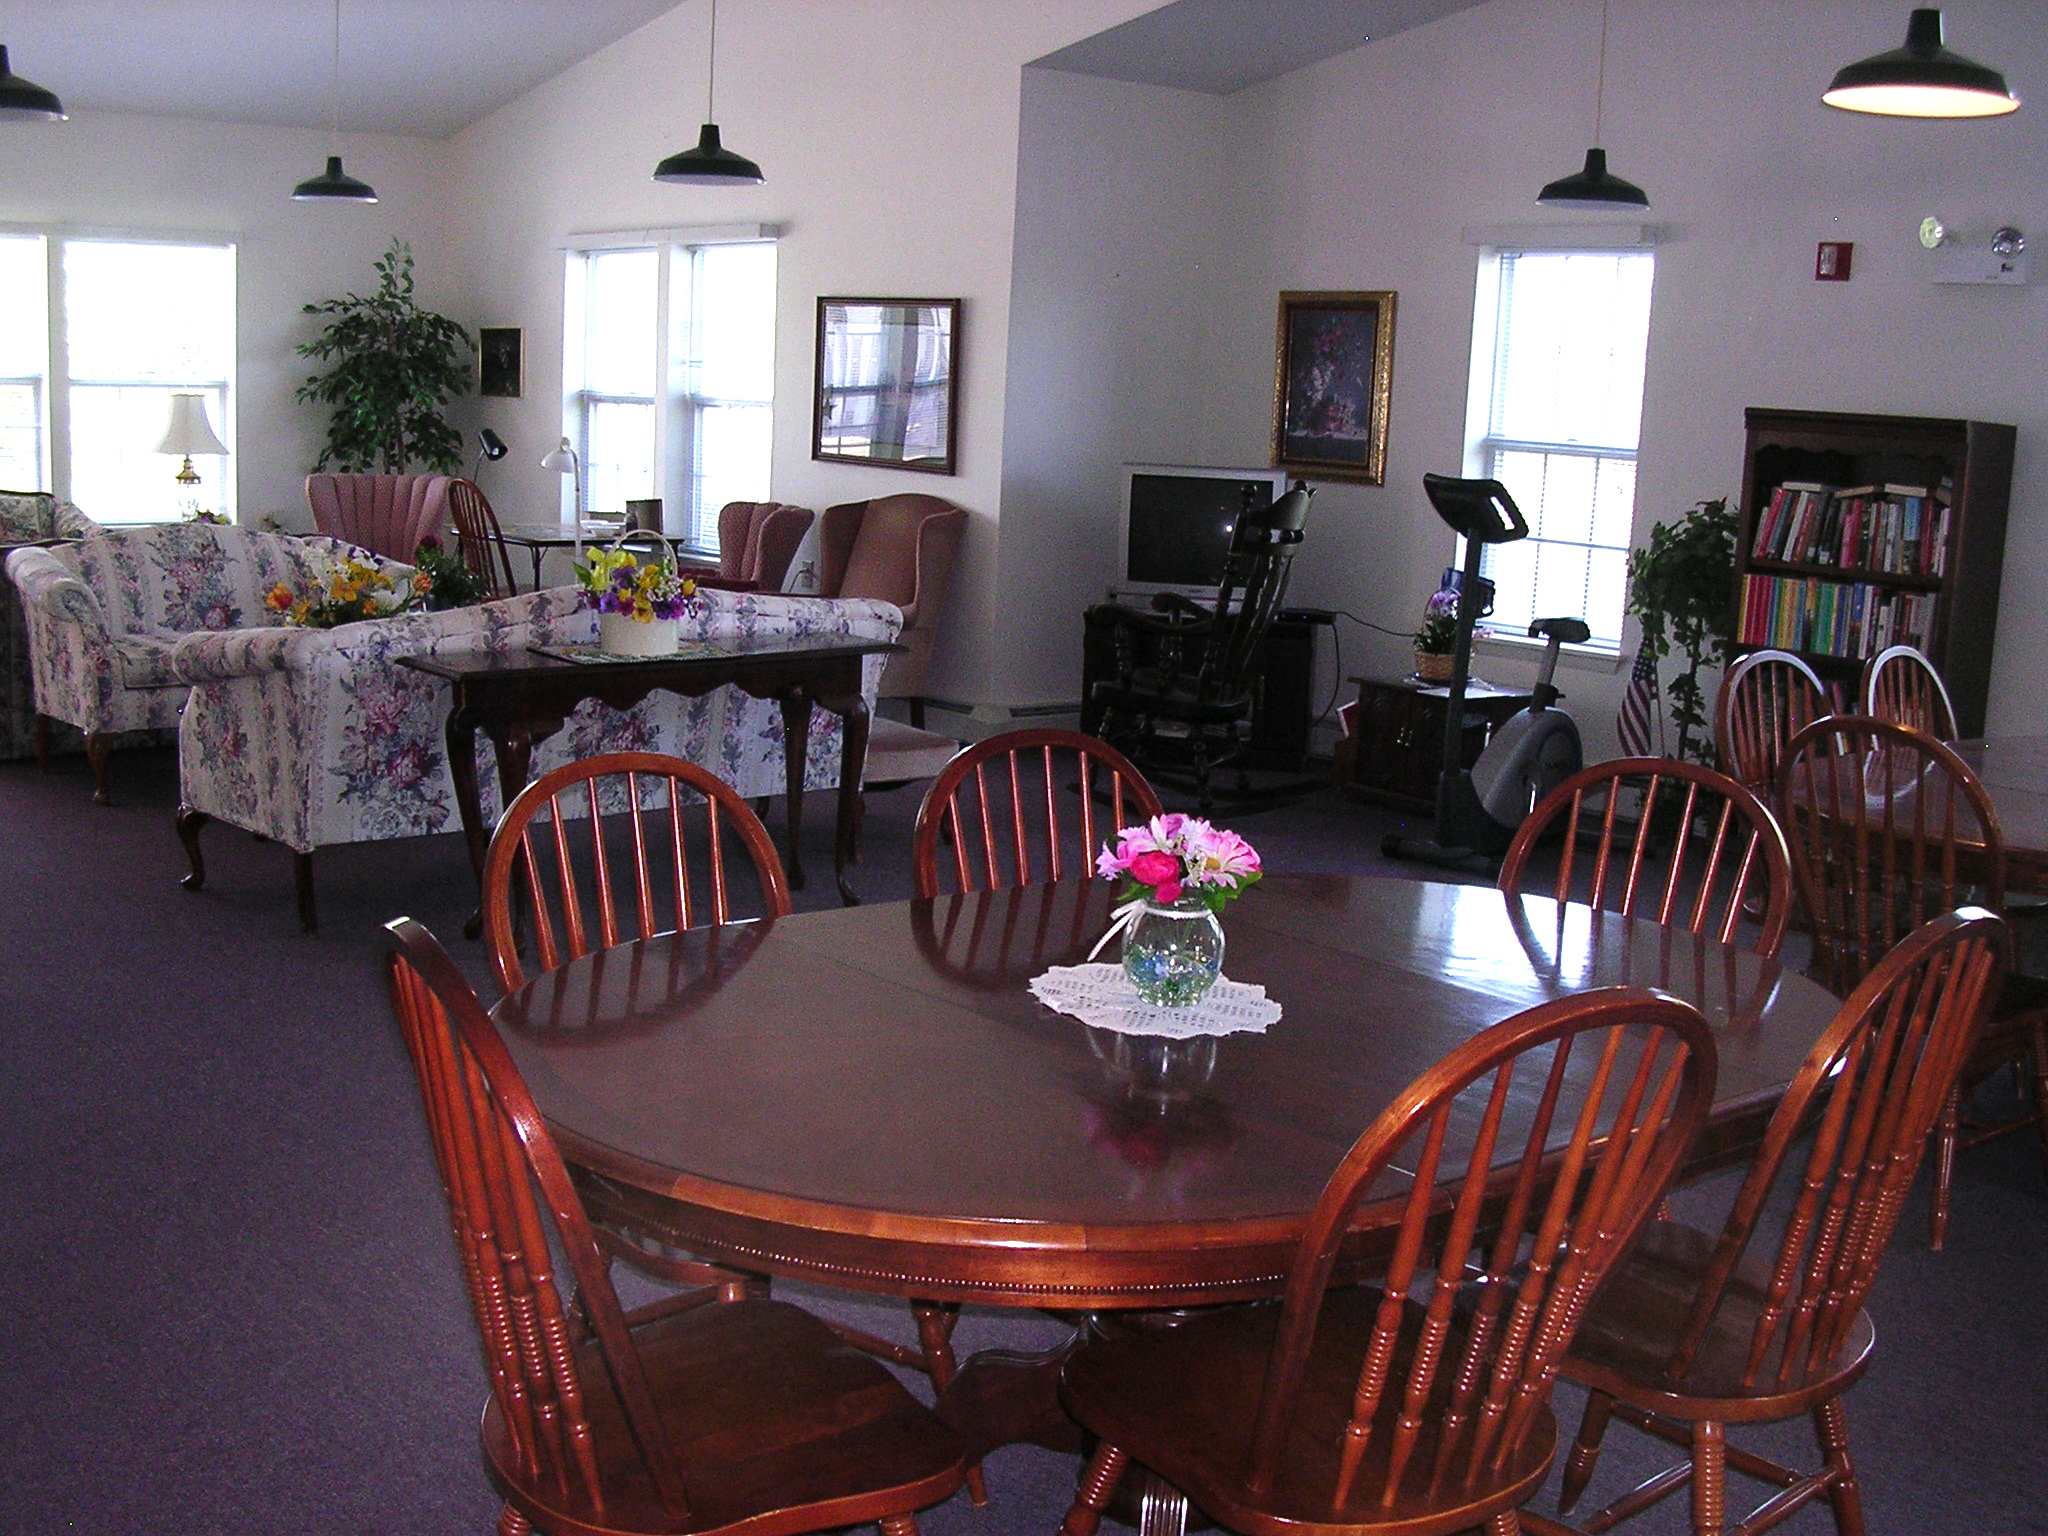 property management company syracuse ny image of the community room for colonial village